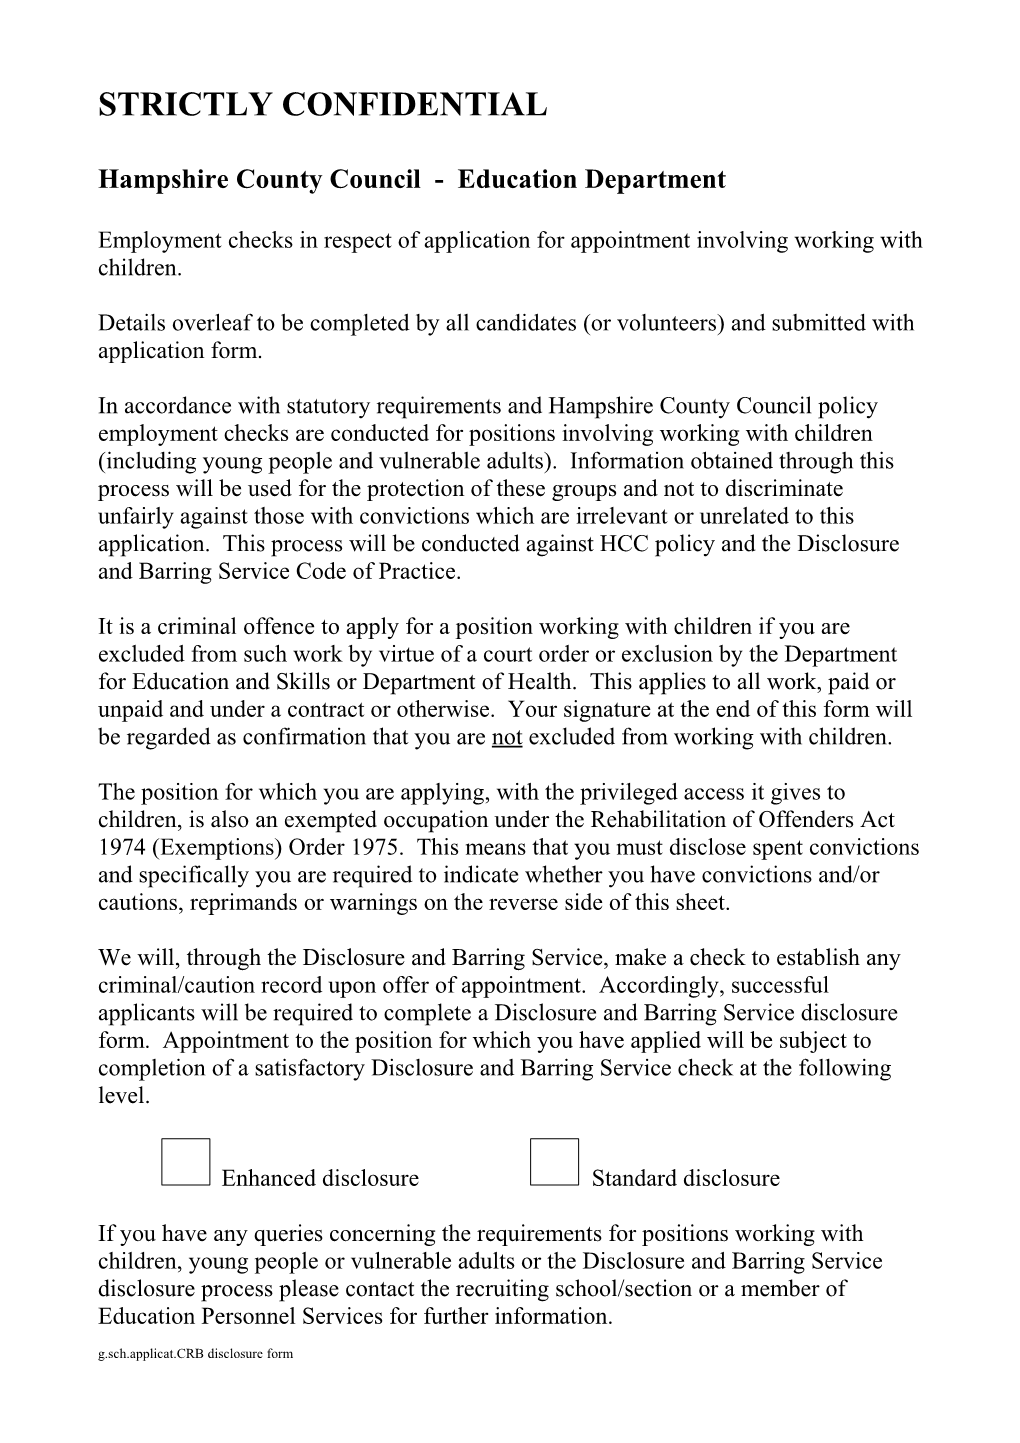 Hampshire County Council - Education Department